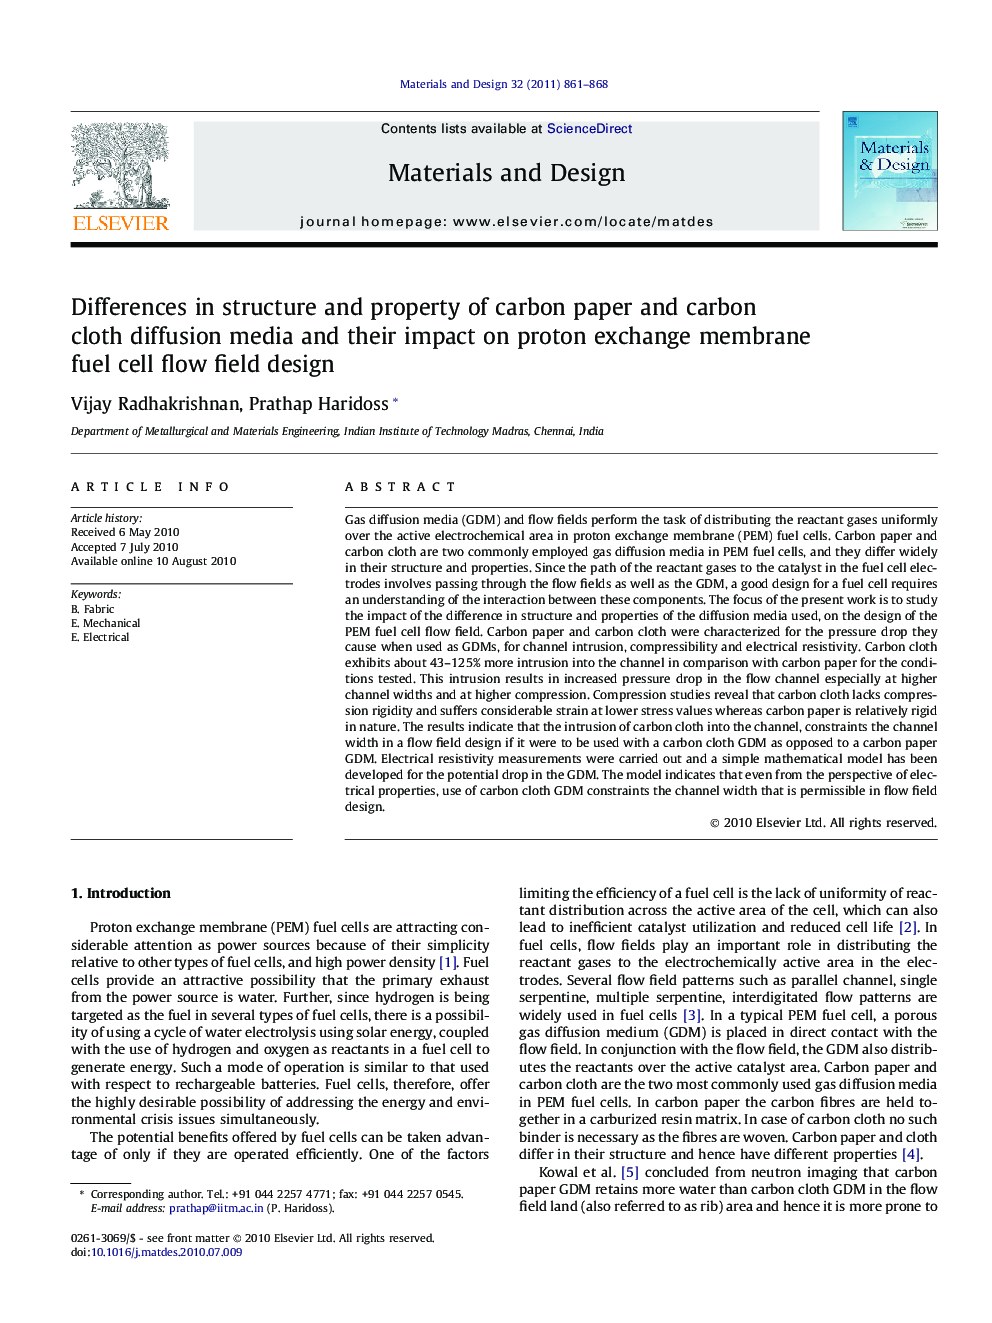 Differences in structure and property of carbon paper and carbon cloth diffusion media and their impact on proton exchange membrane fuel cell flow field design